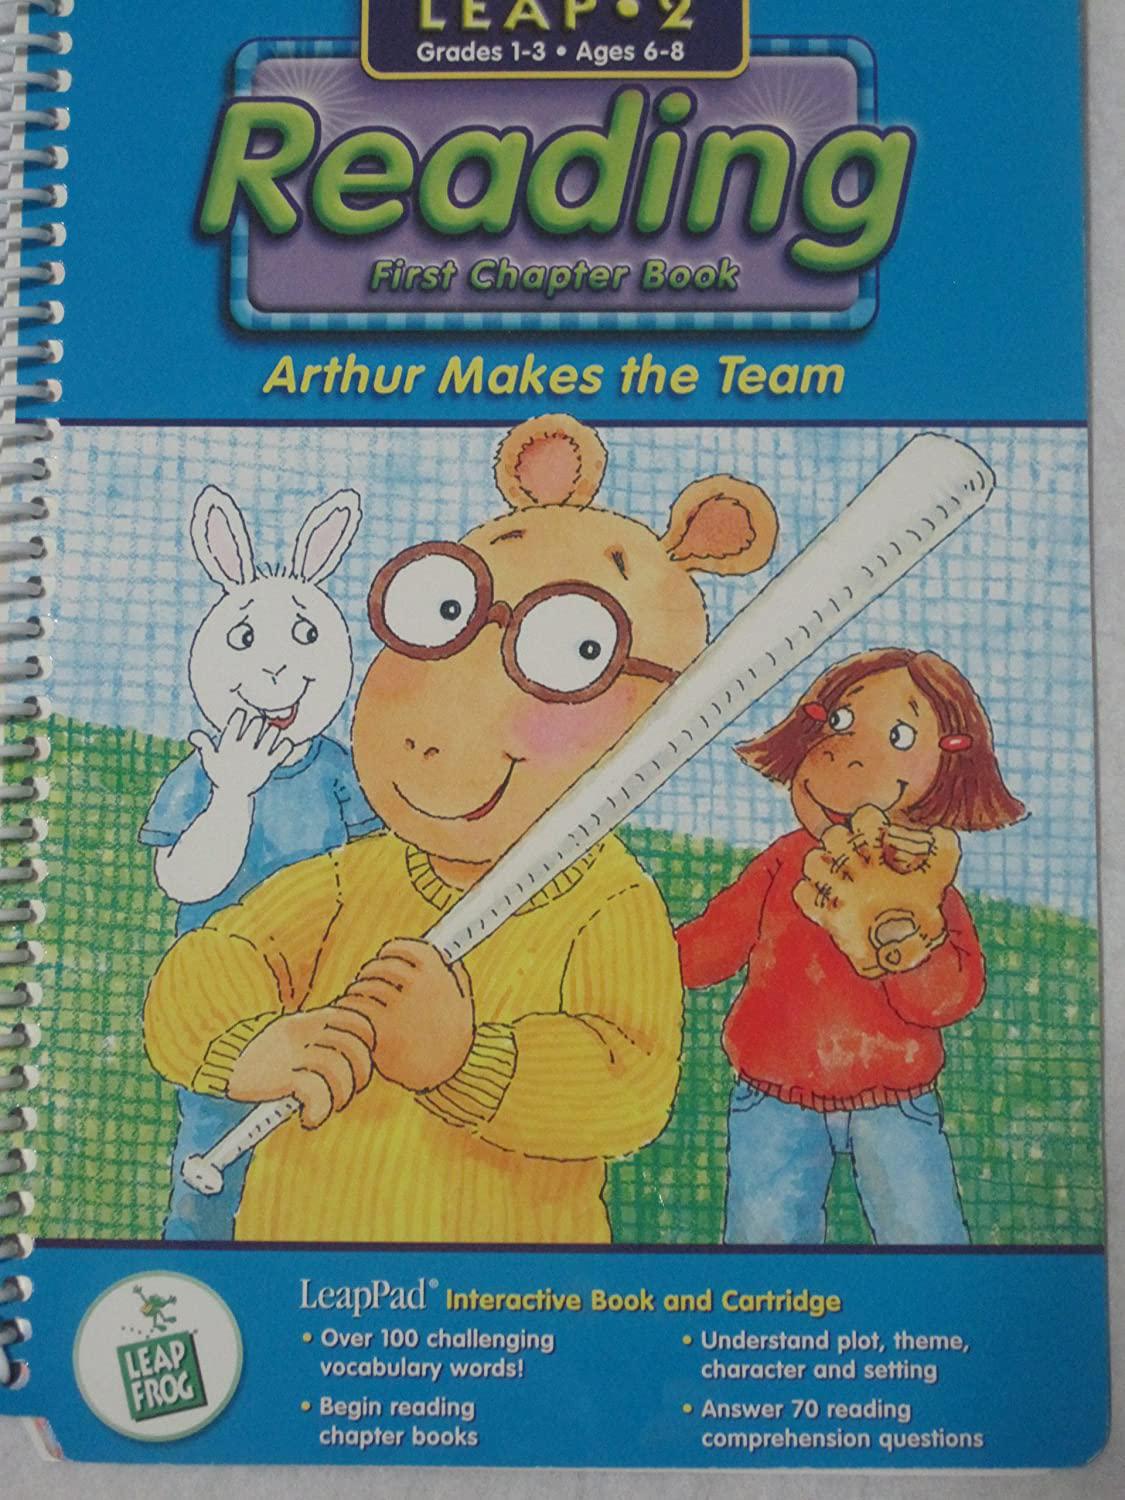 LeapFrog, Leap 2 Arthur Makes The Team (Grades 1 - 3) Interactive Book and Cartridge